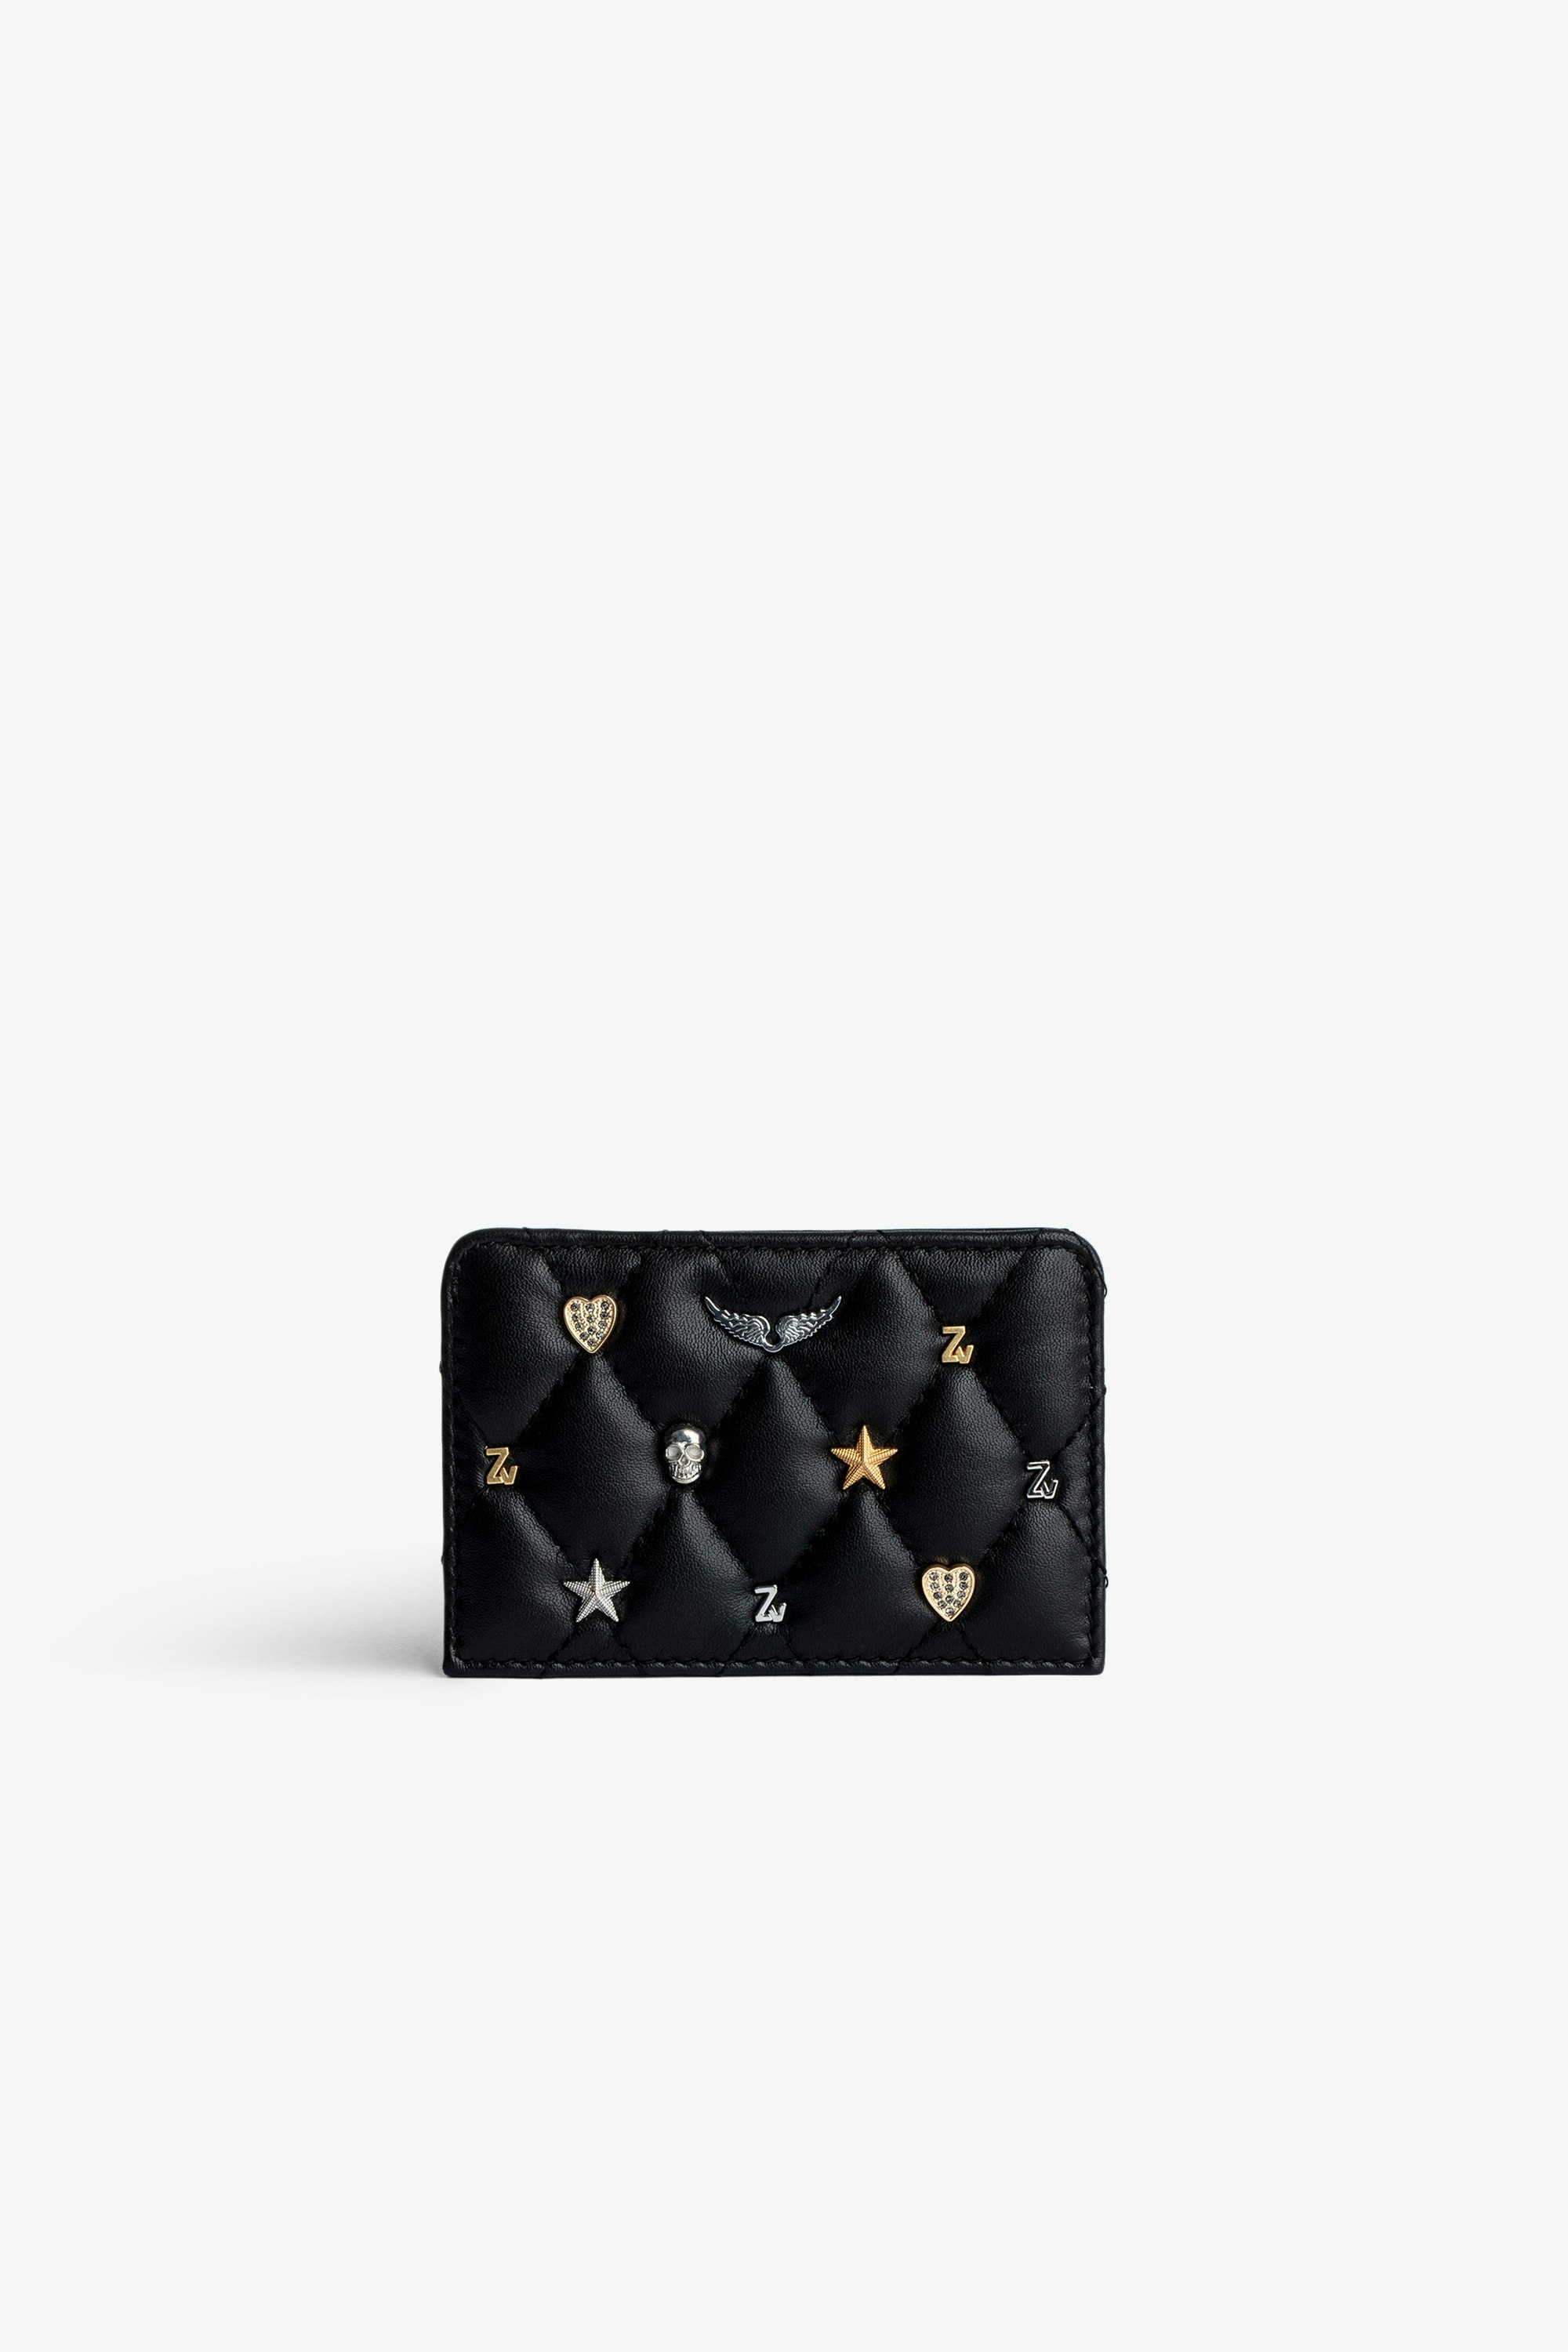 ZV Pass Card Holder Women’s black quilted leather card holder with silver- and gold-tone charms.